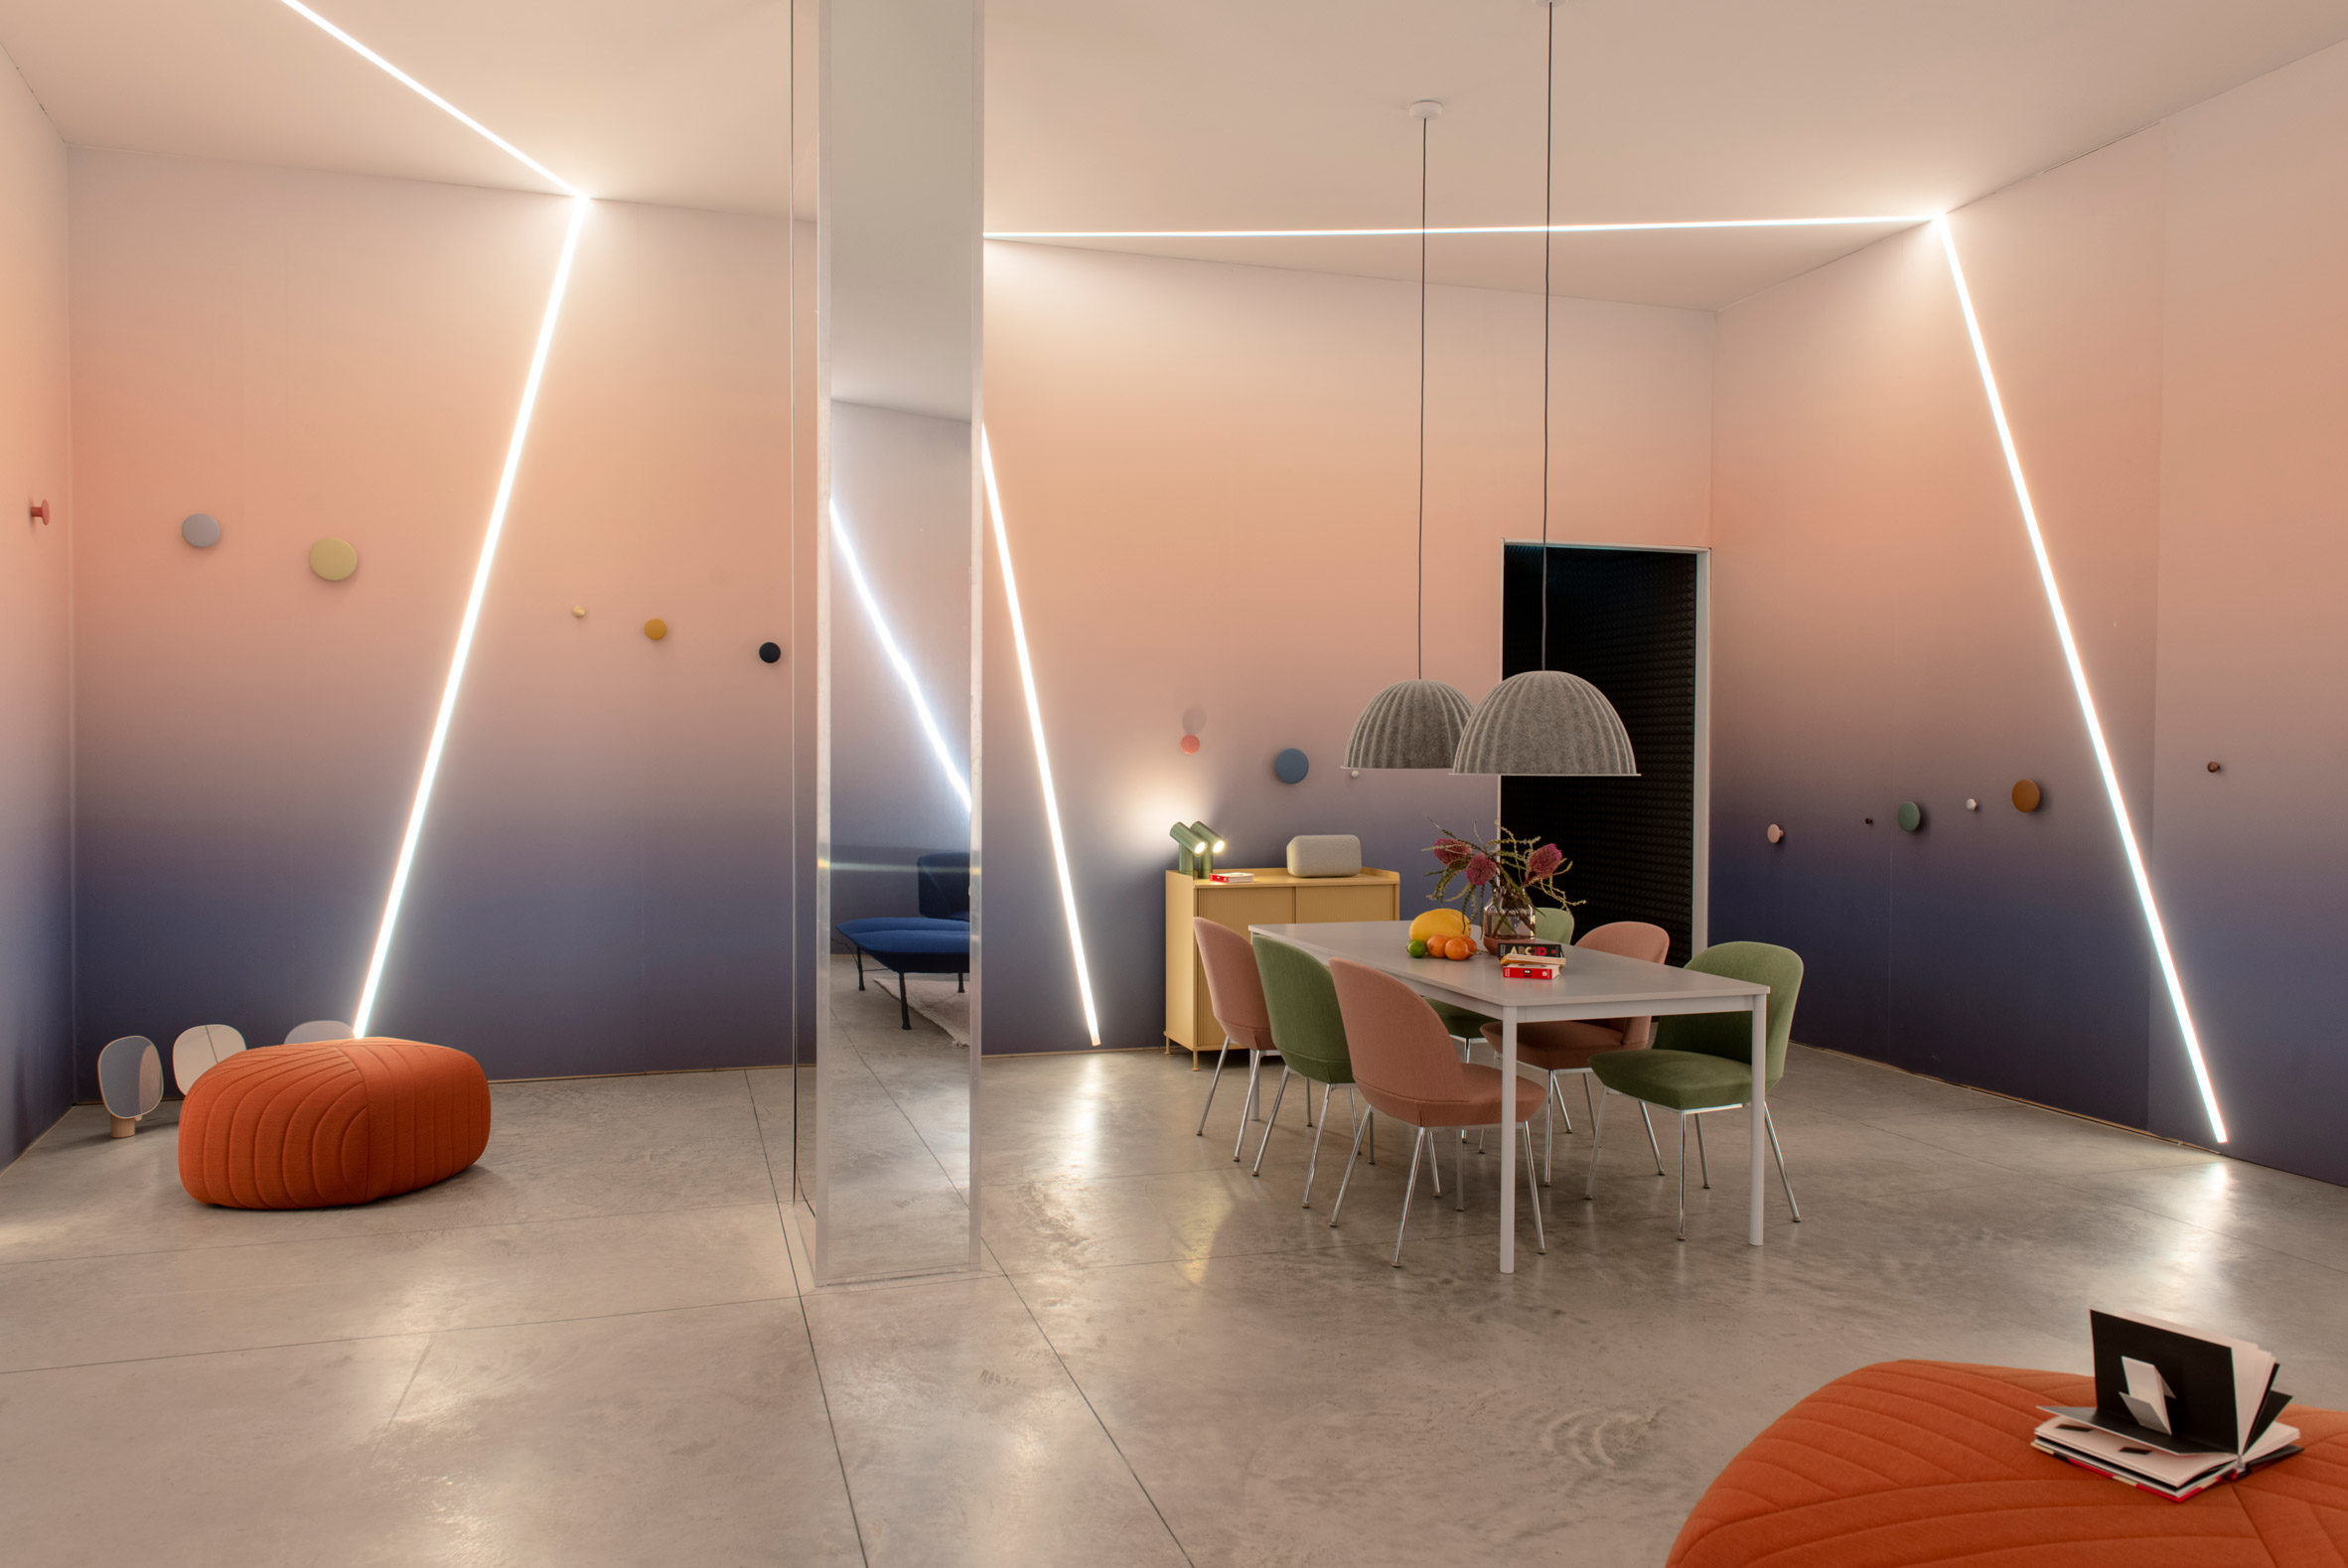 Google explores neuroaesthetic design with A Space for Being installation in Milan